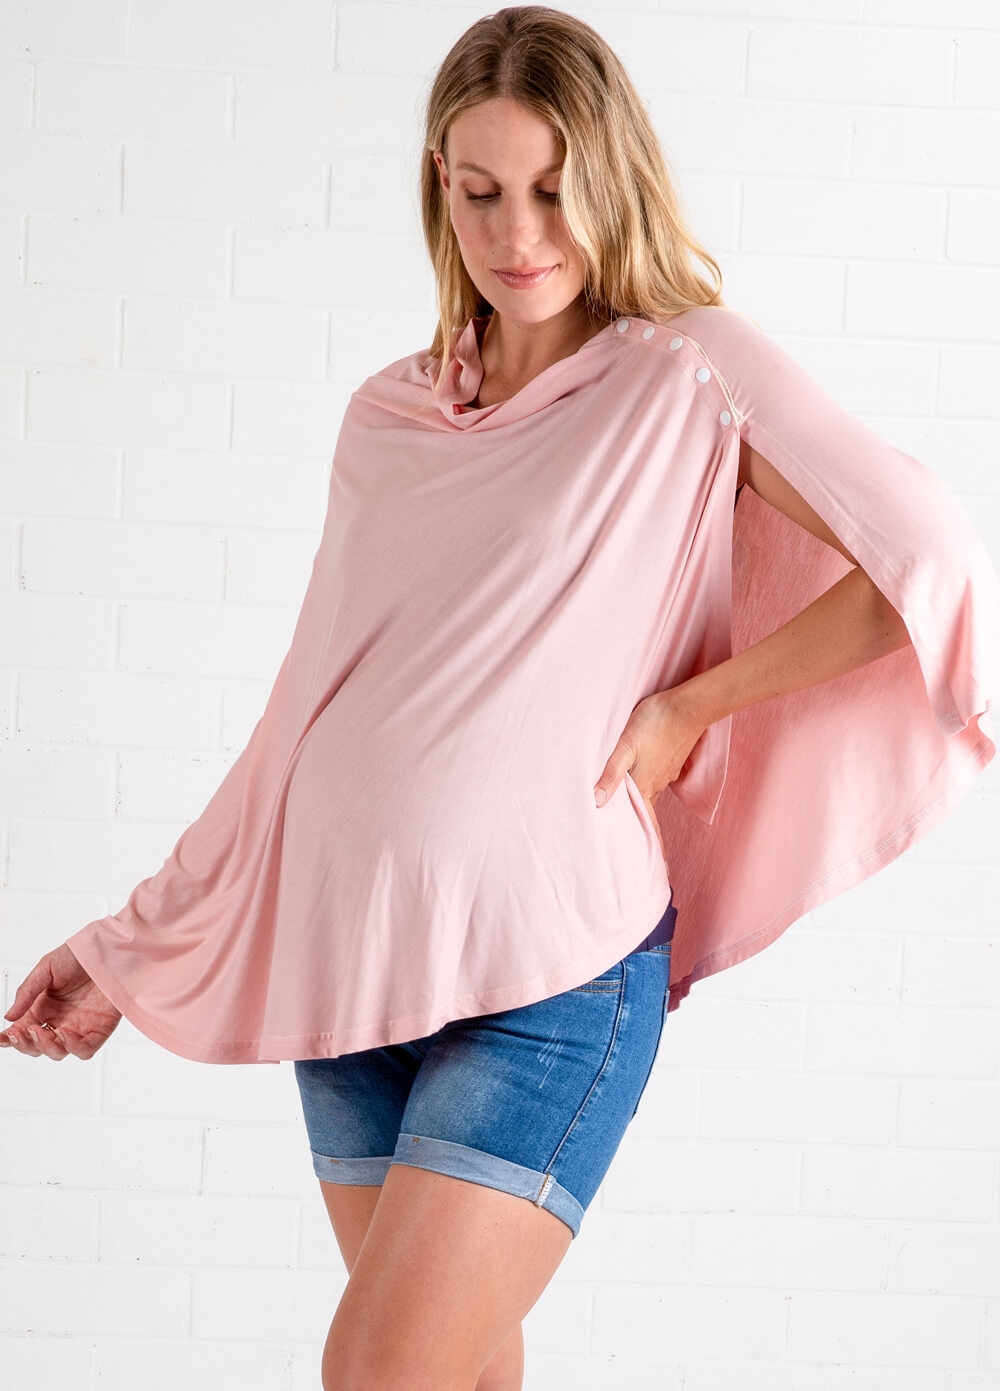 Lait & Co - Memoire Nursing Cover Shawl in Pink | Queen Bee